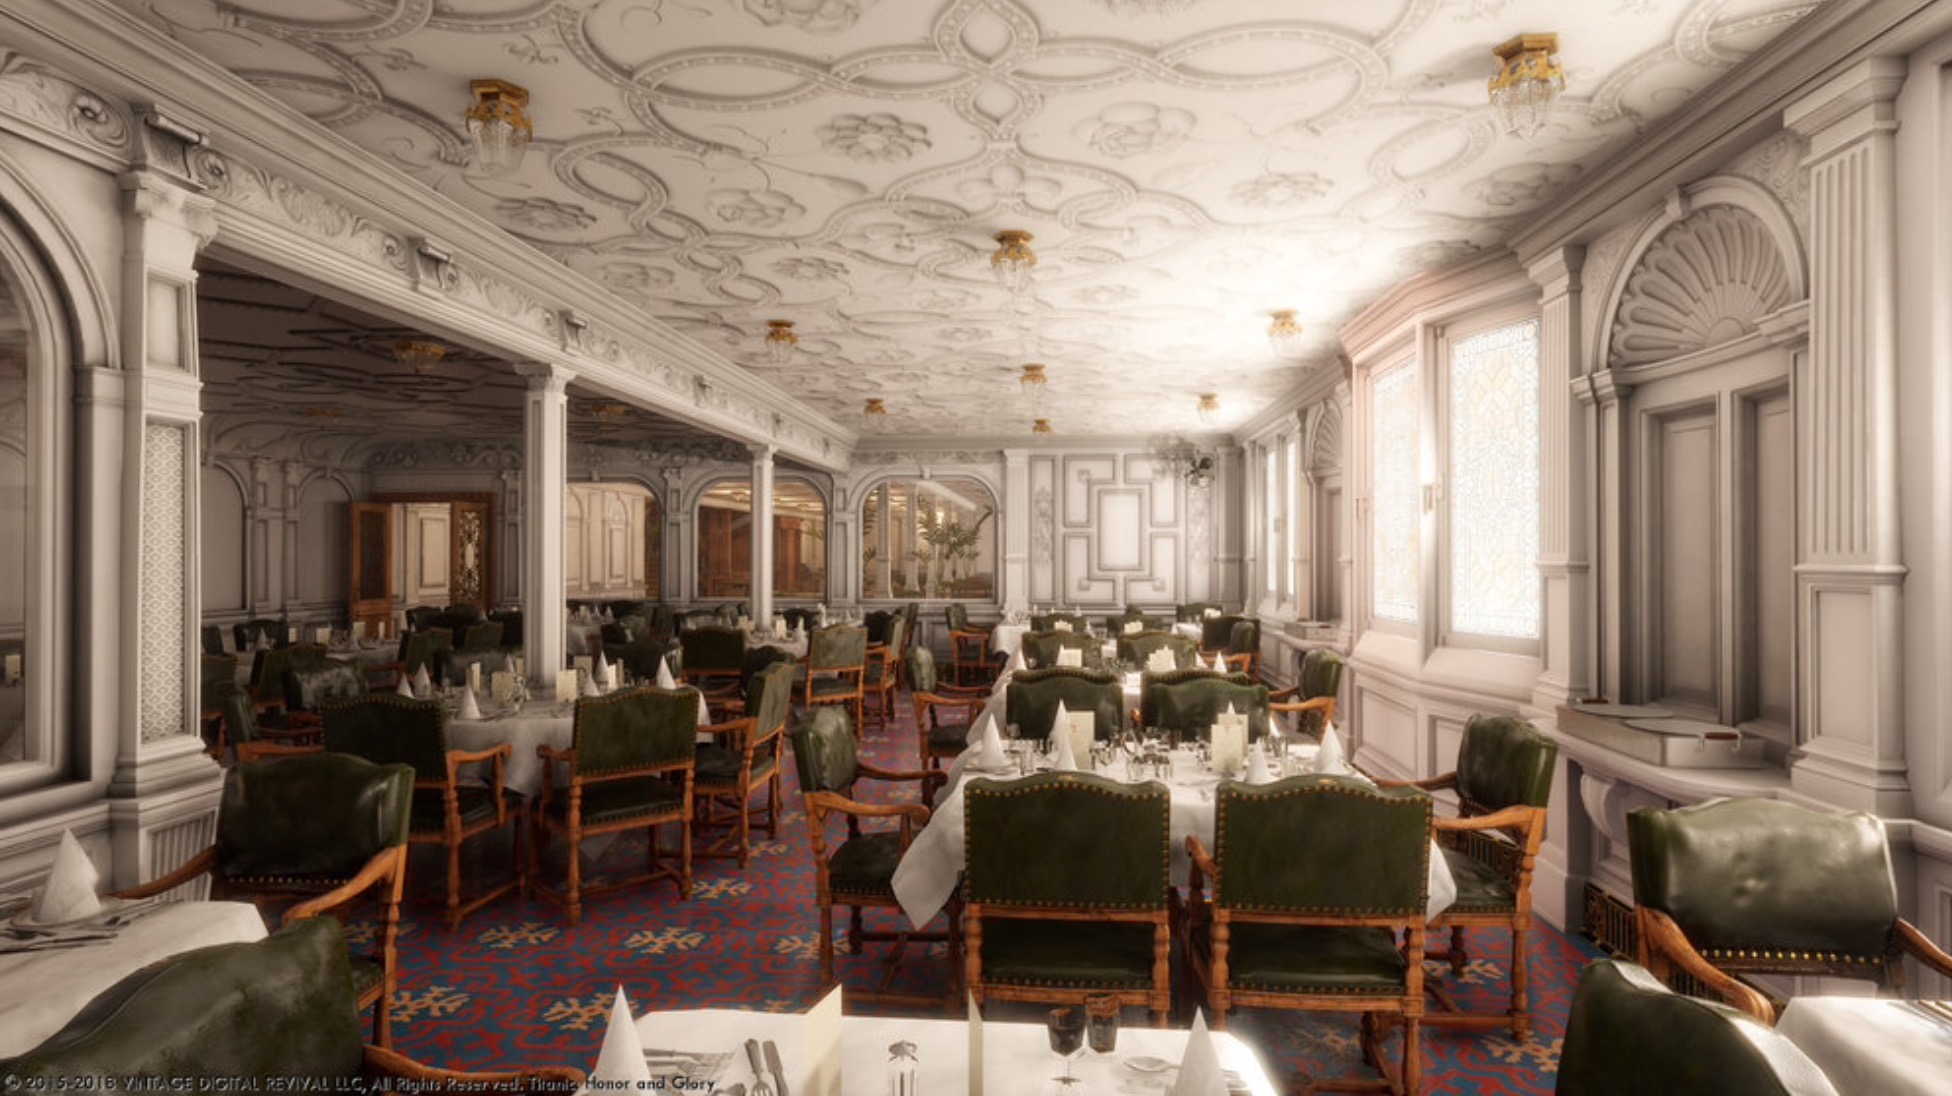 First Class Dining Room On The Titanic